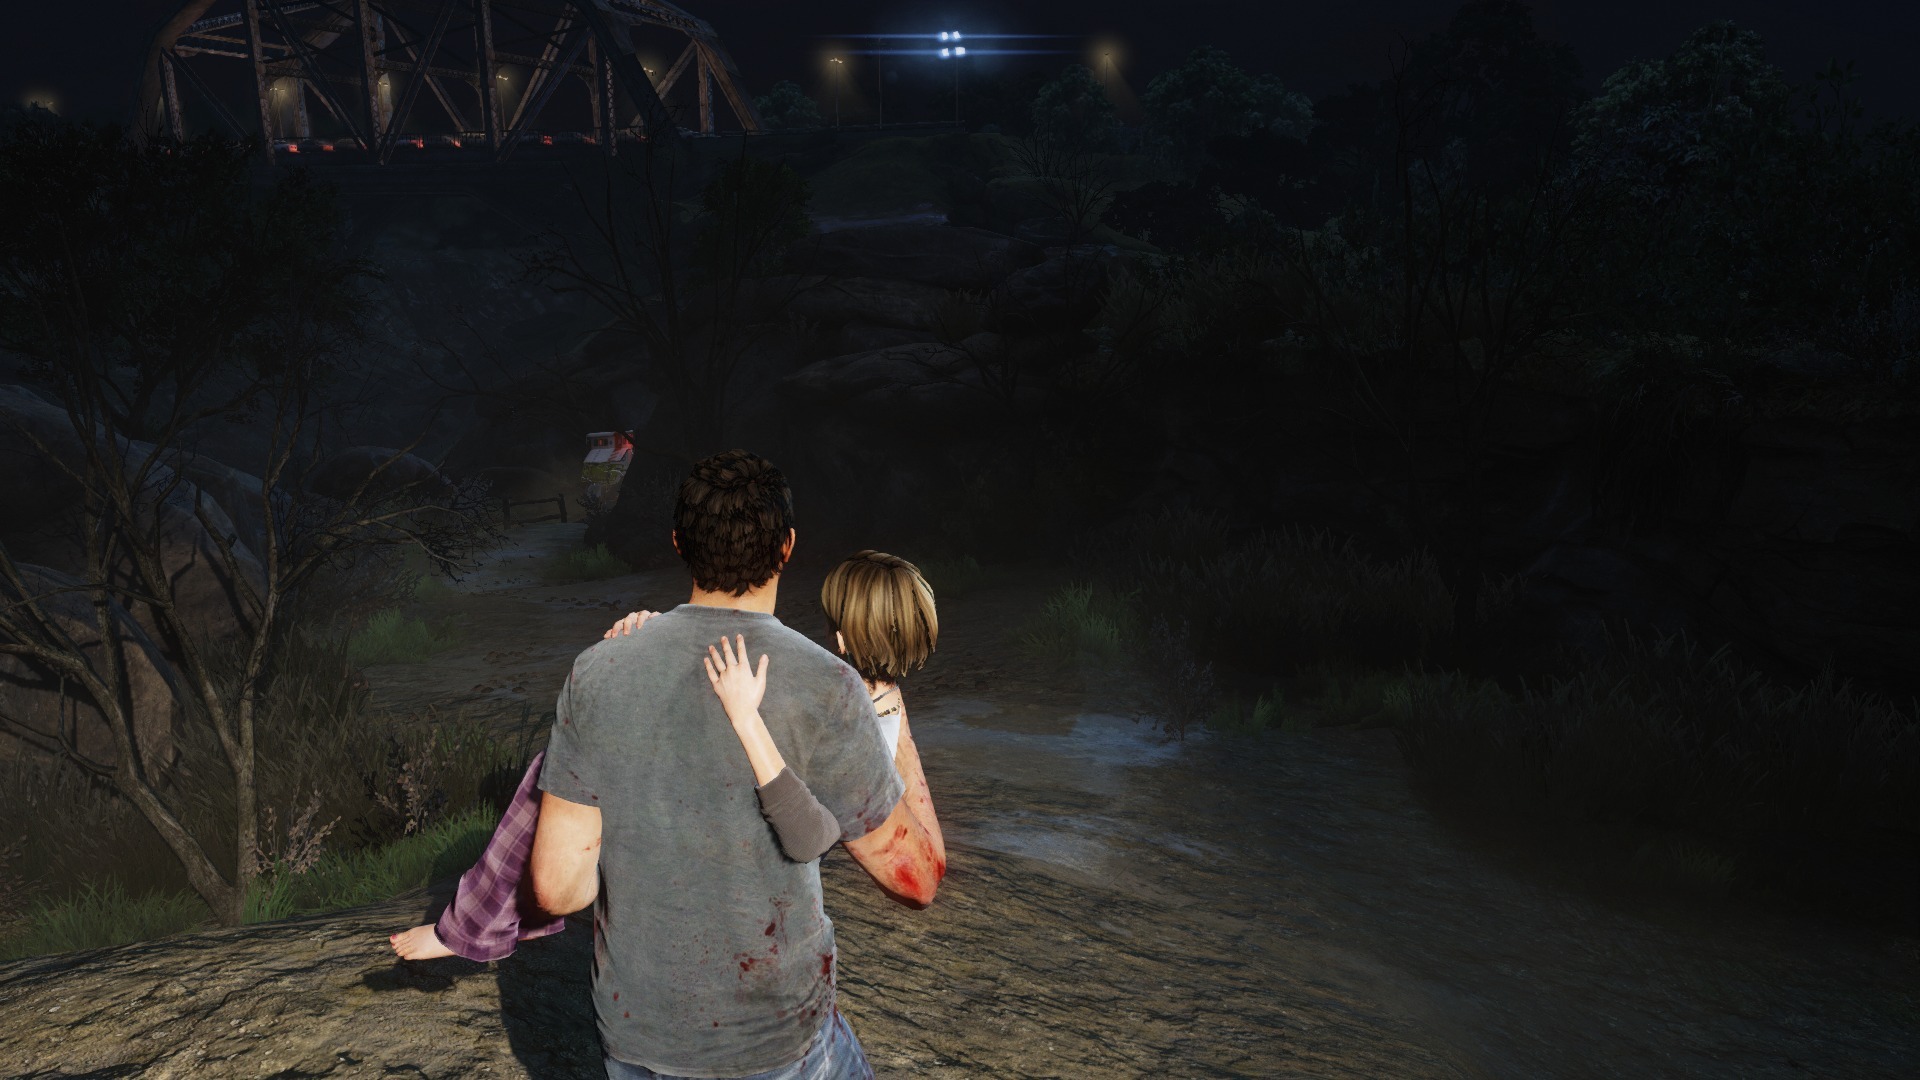 Only two of us. Ремастер тлоу 2. The last of us 3 игра. TLOU ps3.